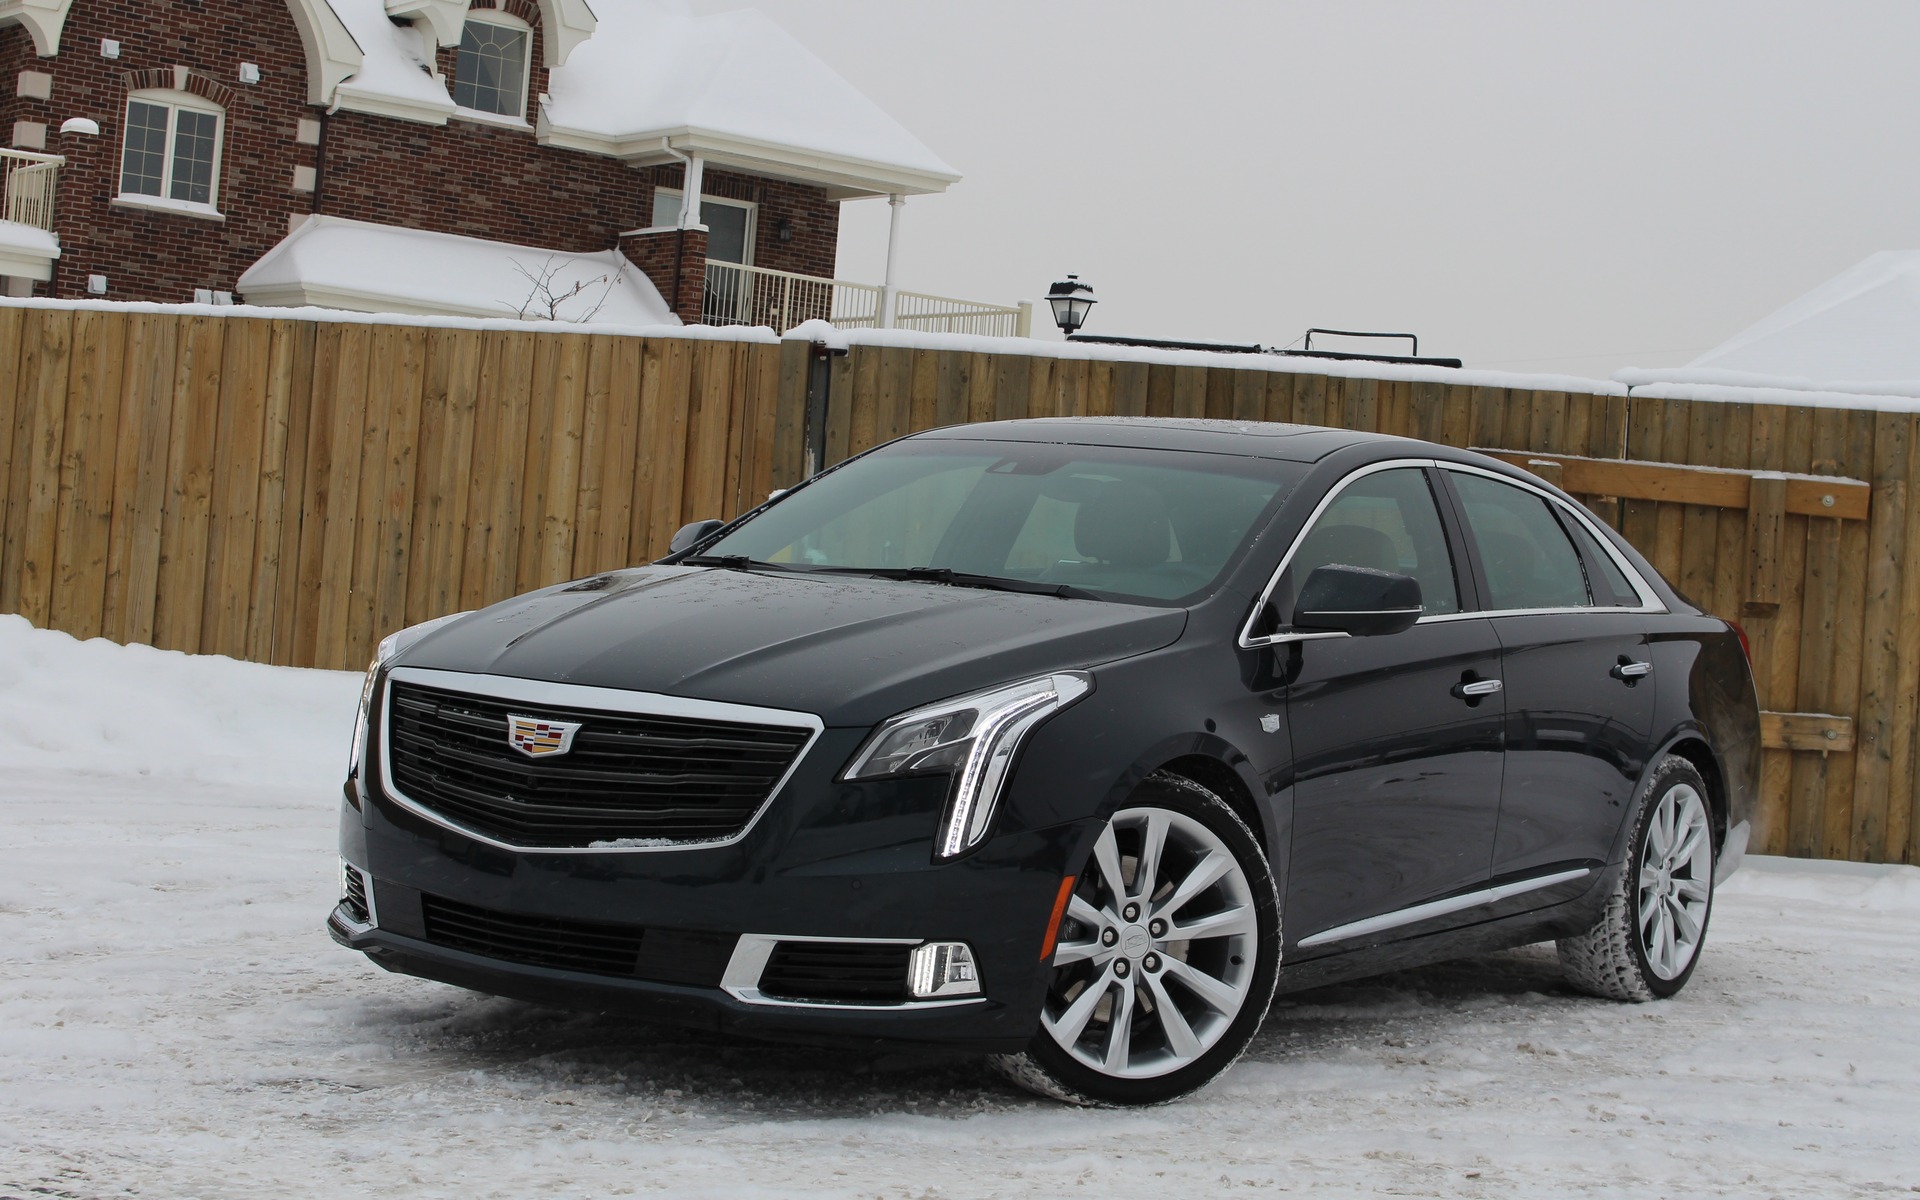 2018 Cadillac XTS V-Sport: the Classic Caddy - The Car Guide